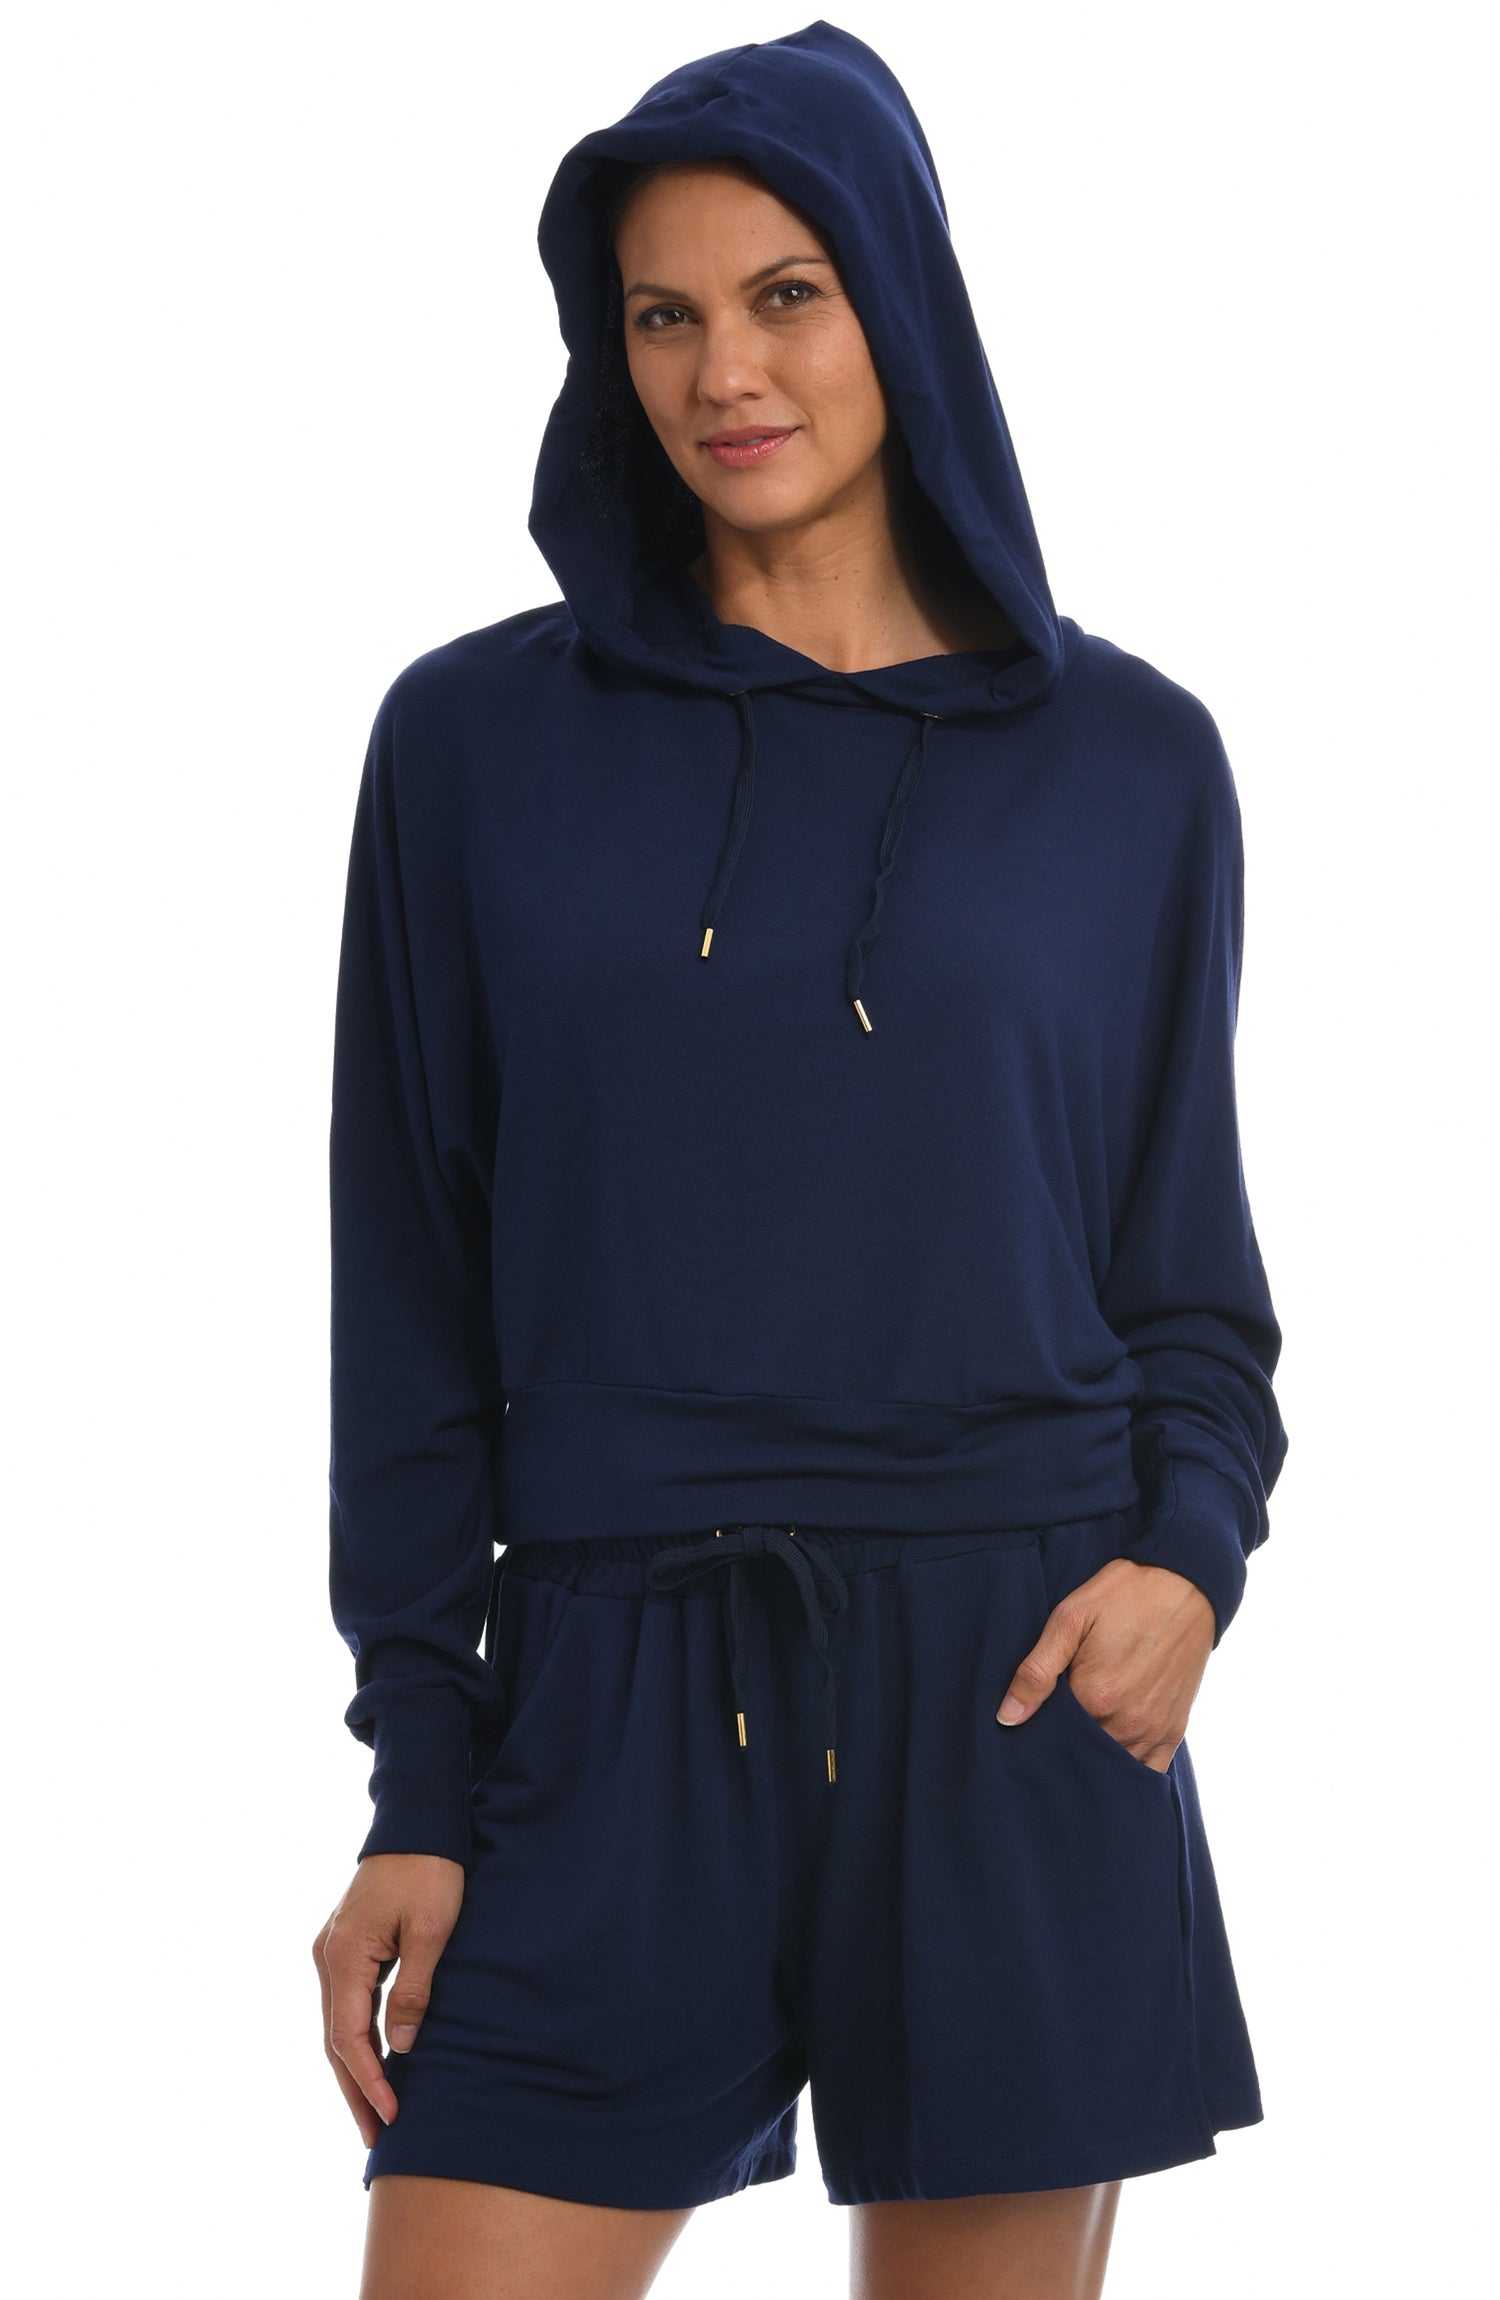 Model is wearing a midnight colored french terry hoodie from our Cozy Knit collection!